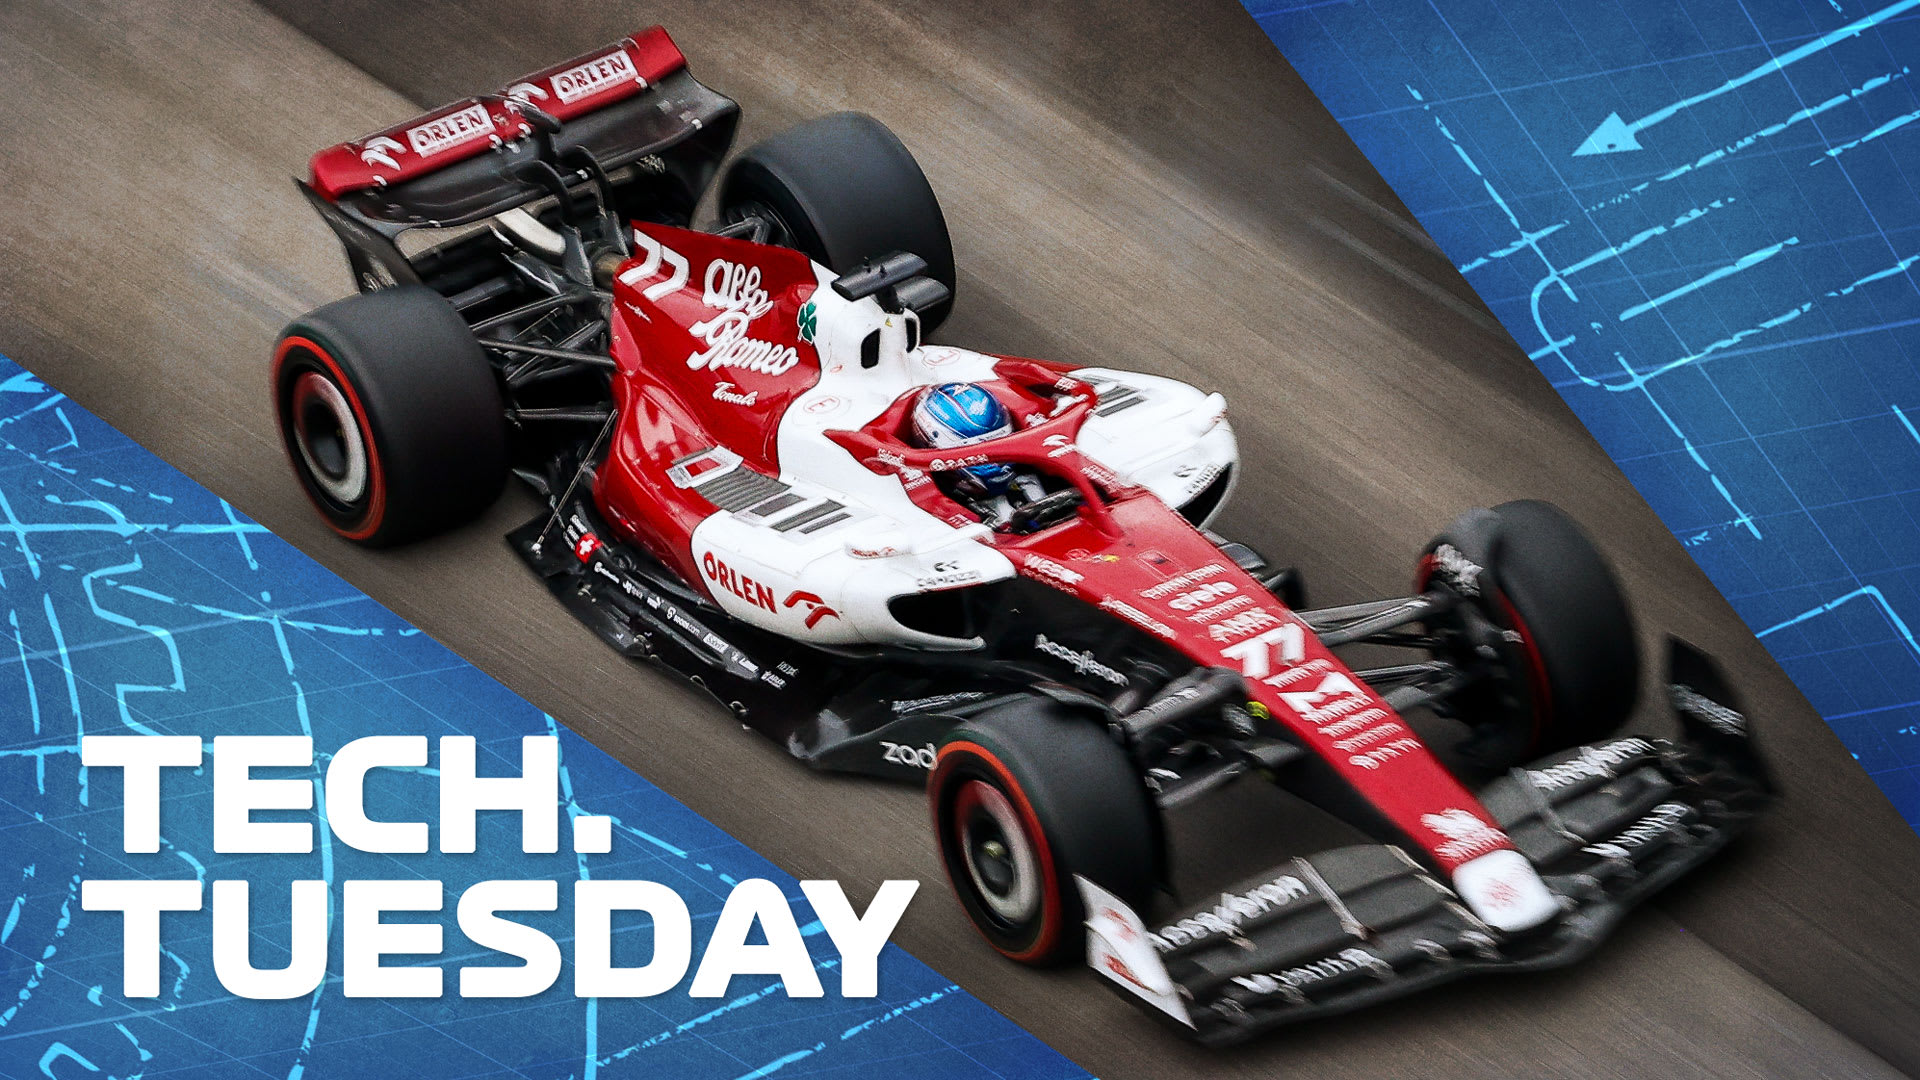 TECH TUESDAY: Has a philosophy change at Alfa Romeo launched them to the head of the midfield? - Formula 1